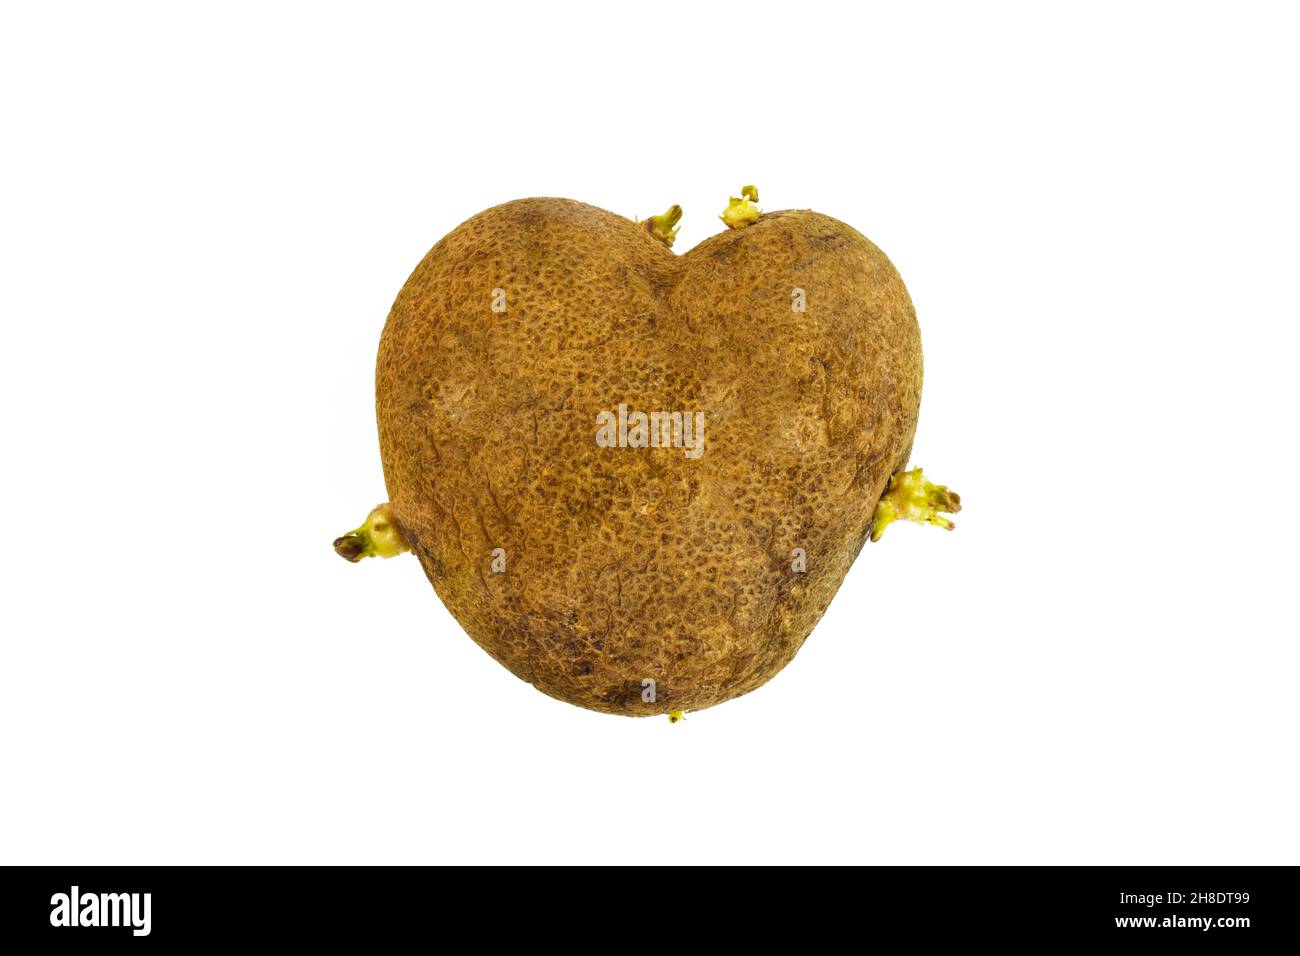 Ugly potato in the heart shape on a white background. Sprouted potato Funny, unnormal vegetable or food waste concept. Stock Photo